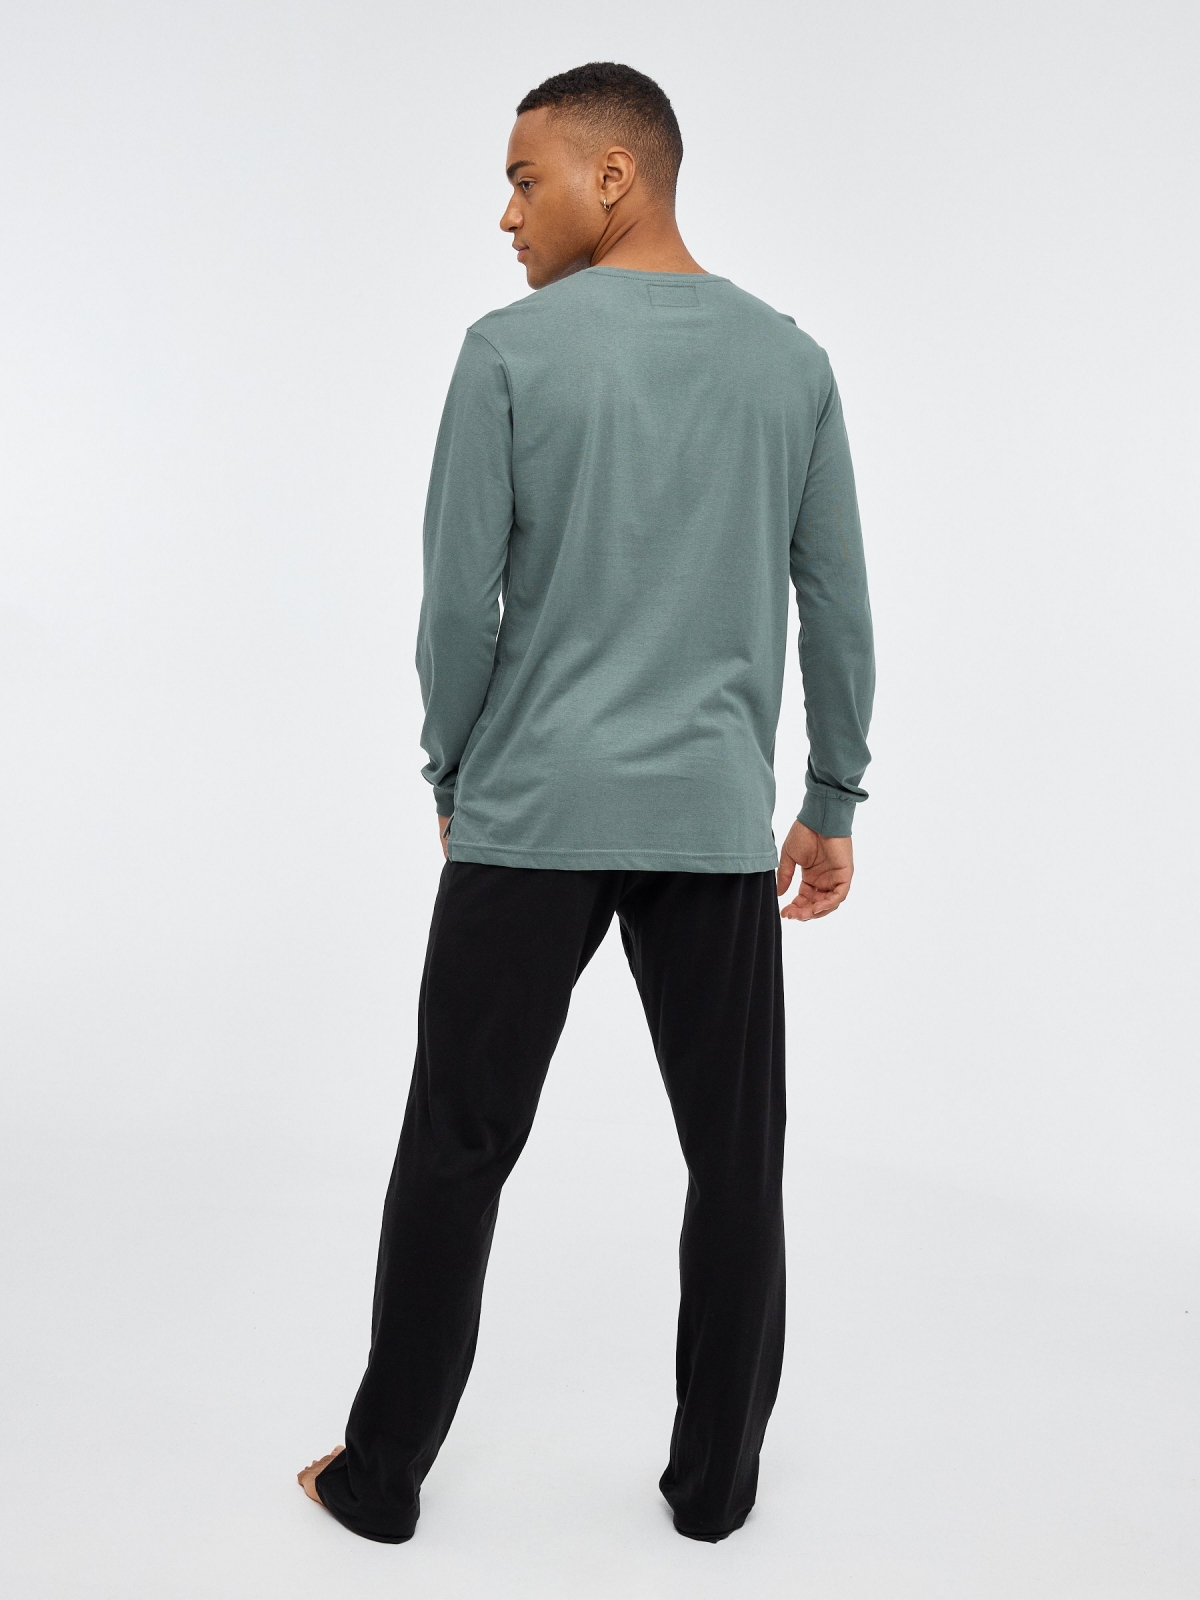 T-shirt pajamas with buttons greyish green back view